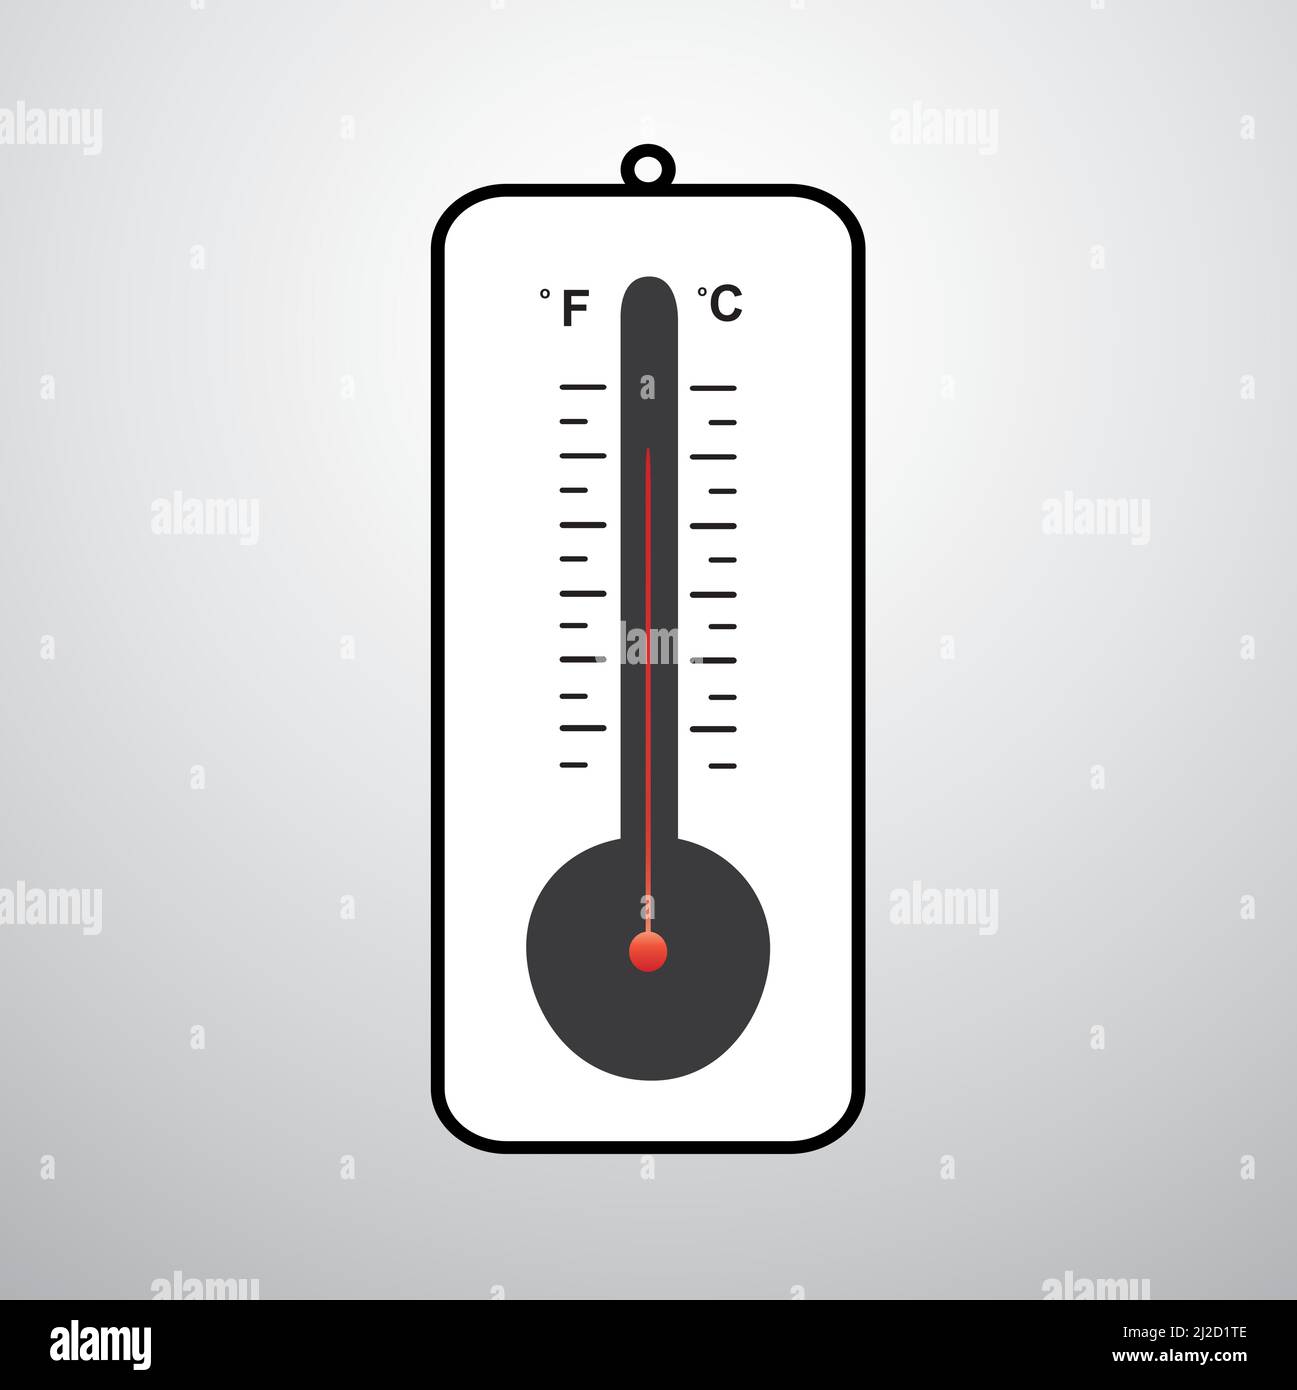 icon of thermometer on a grey background Stock Vector